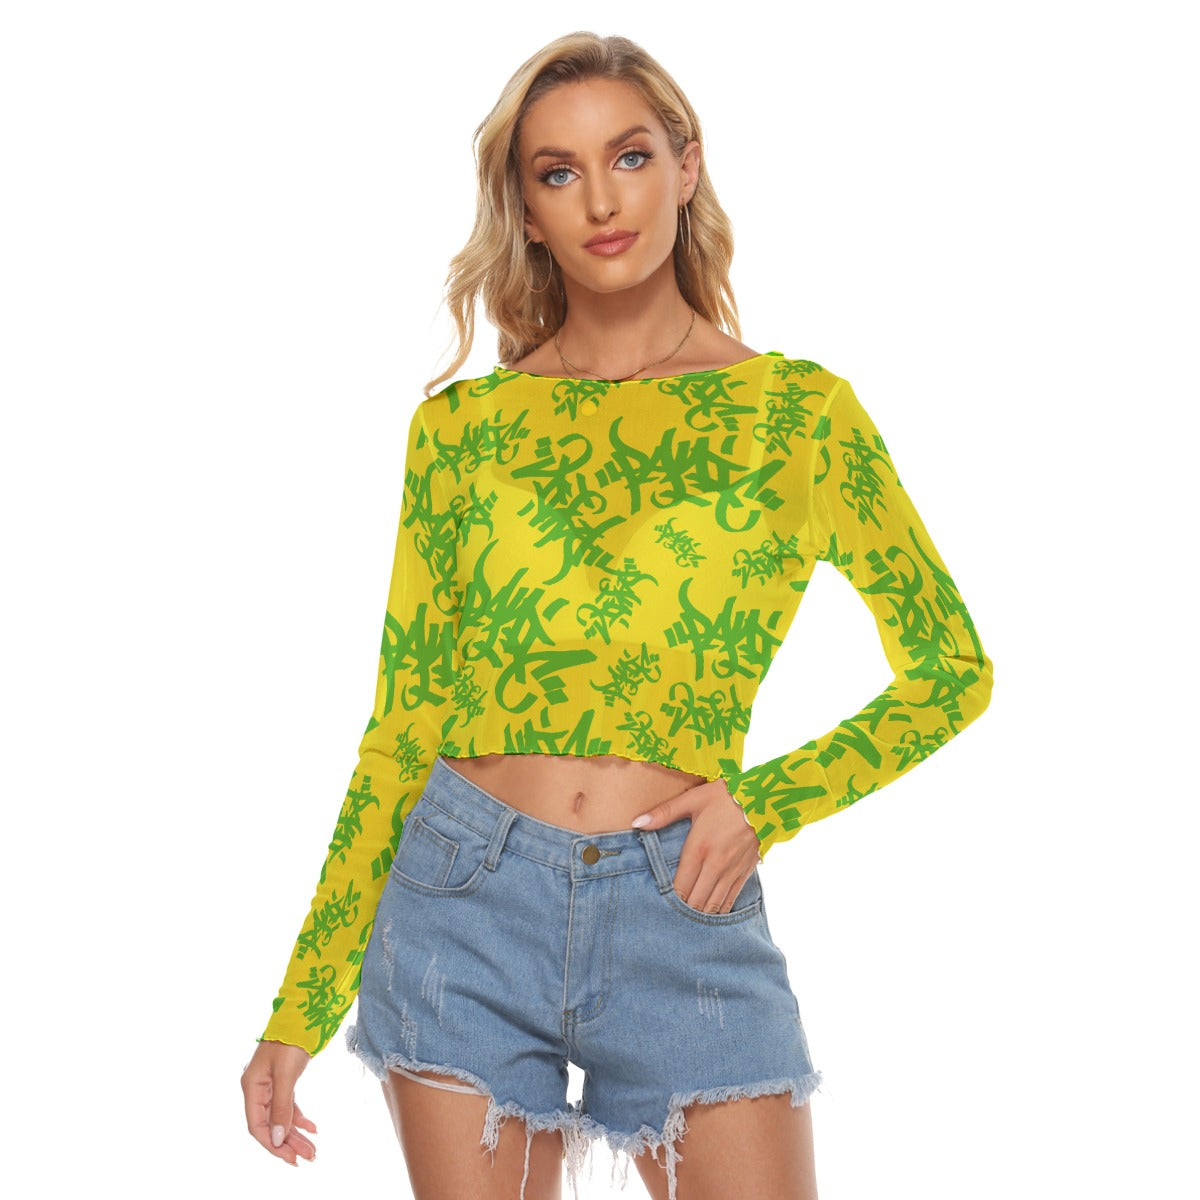 THE TAG MESH WOMENS CROP LONG SLEEVE TOP YELLOW/KELLY